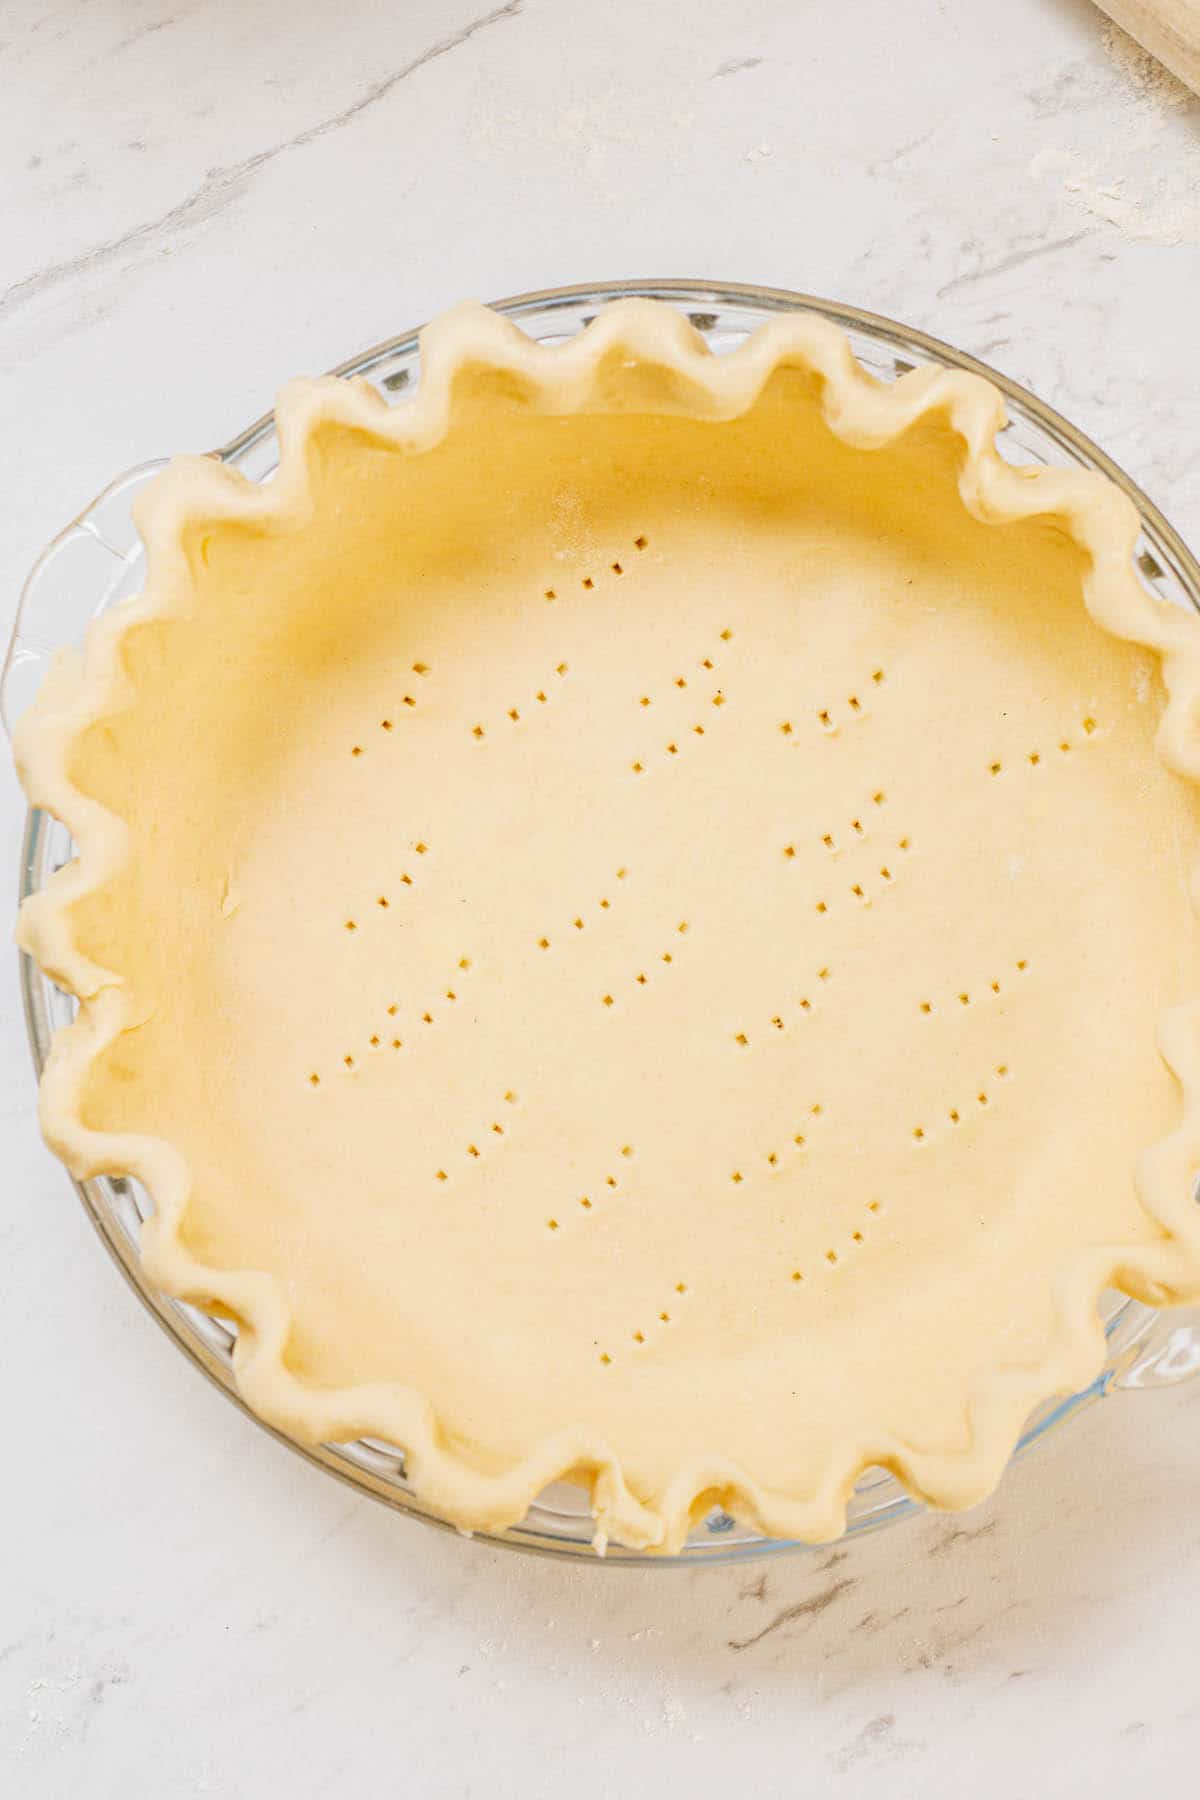 unbaked pie shell.